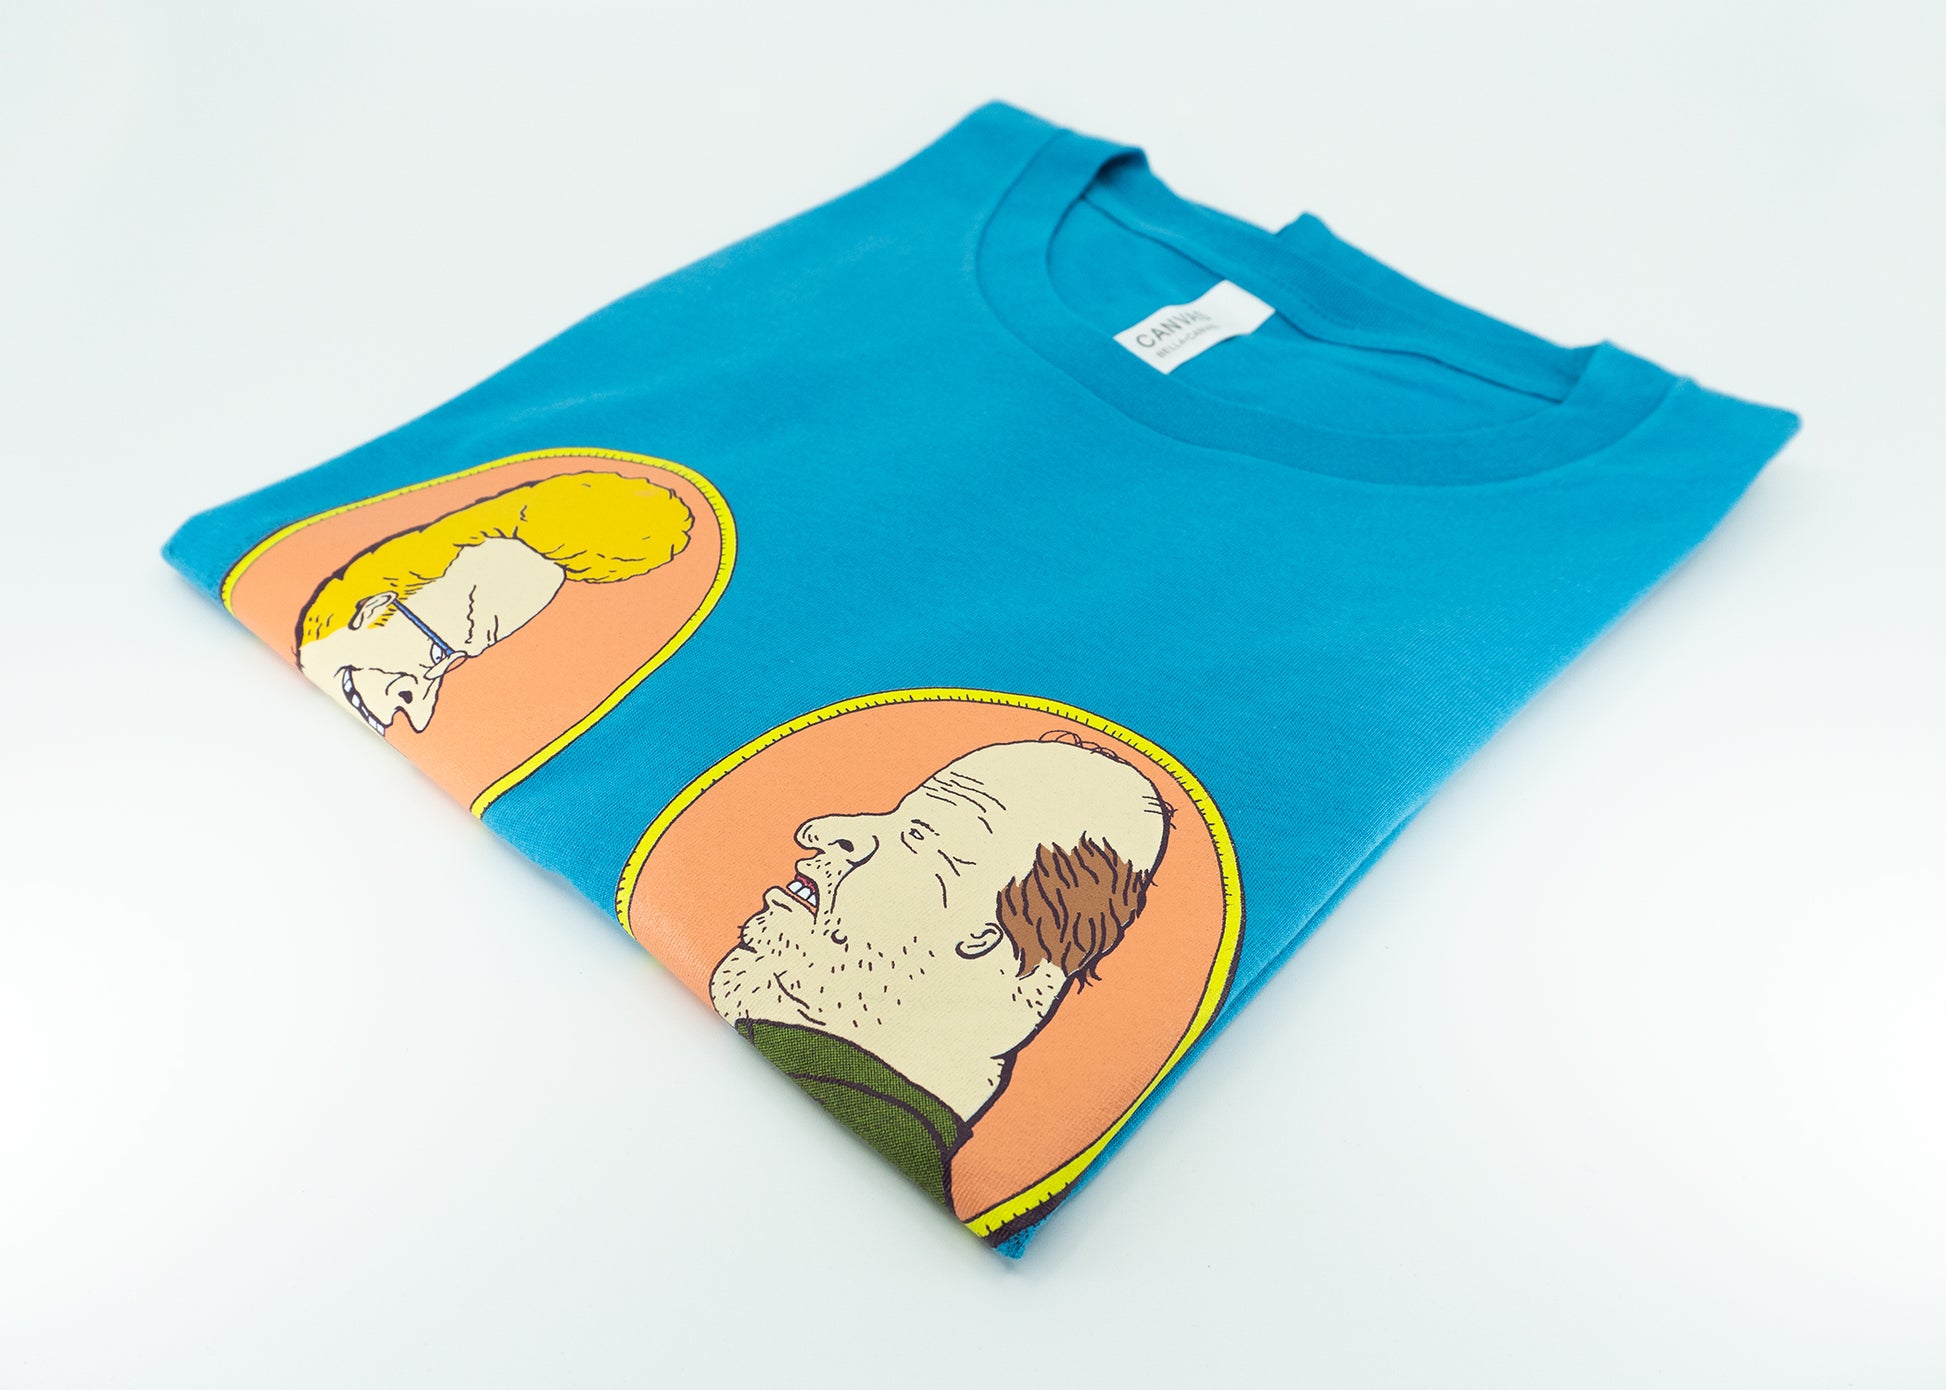 Official Beavis and Butt-Head Aging Like a Fine Beer T-shirt by Titmouse Detail view